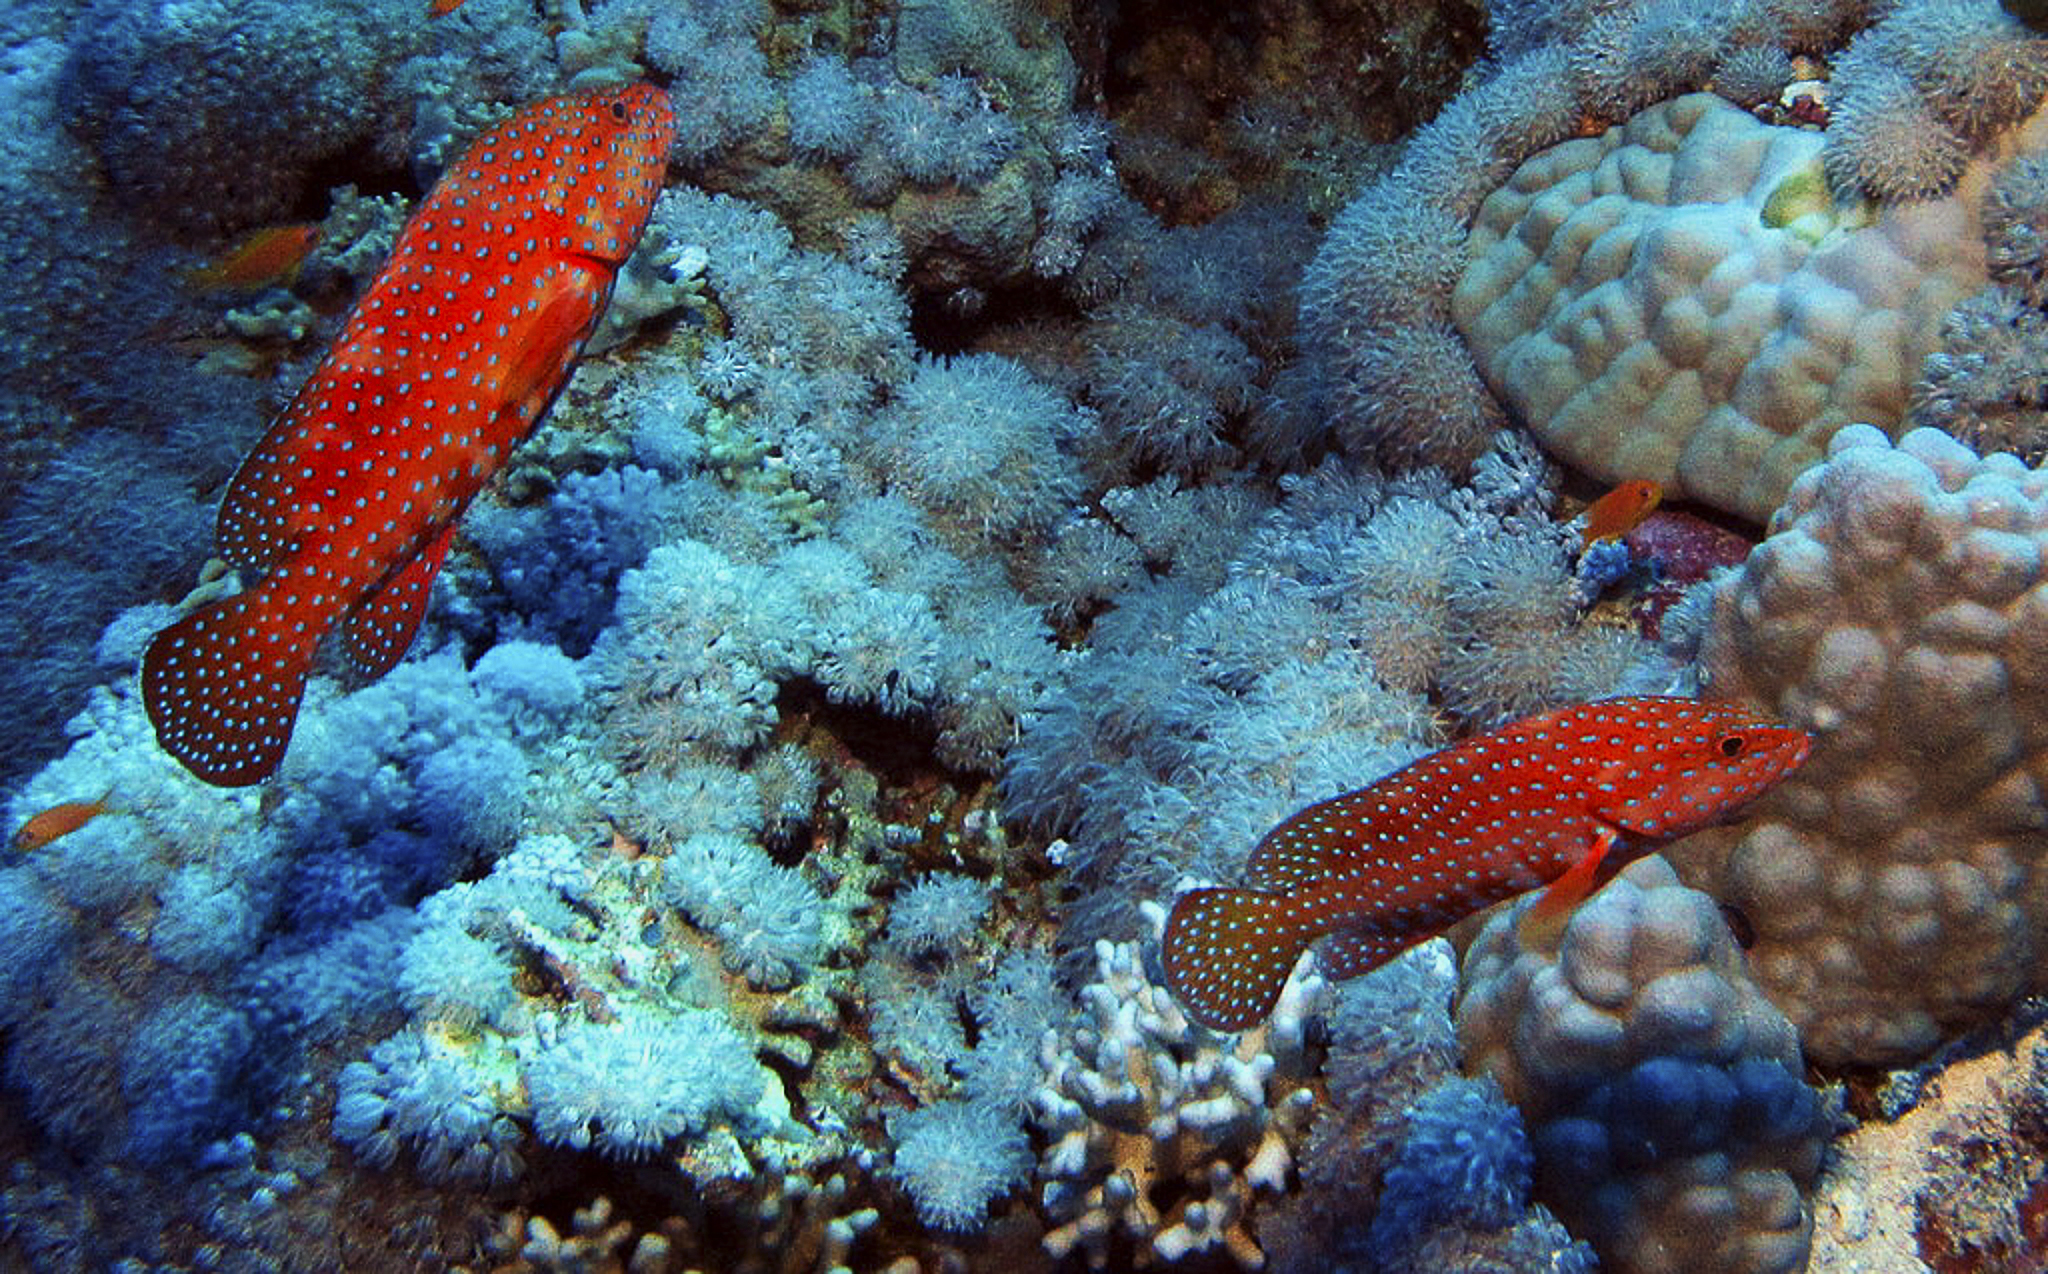 Two Coral Hinds cruising the reef at Daedalus Reef, Red Sea, Egypt